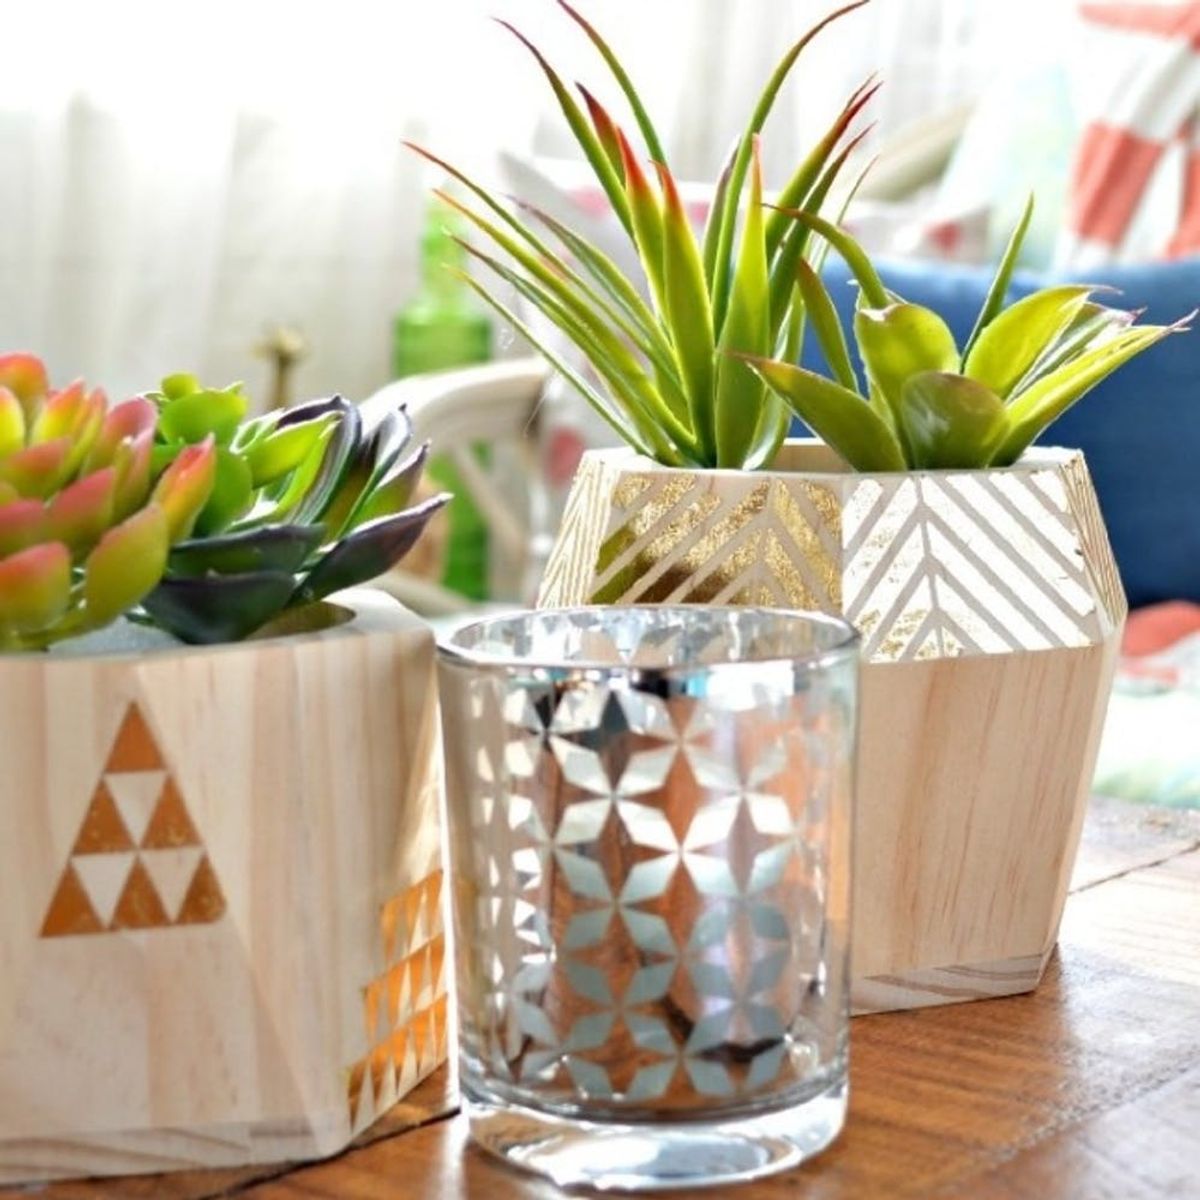 21 Creative Succulent Container Gardens to DIY or Buy Now